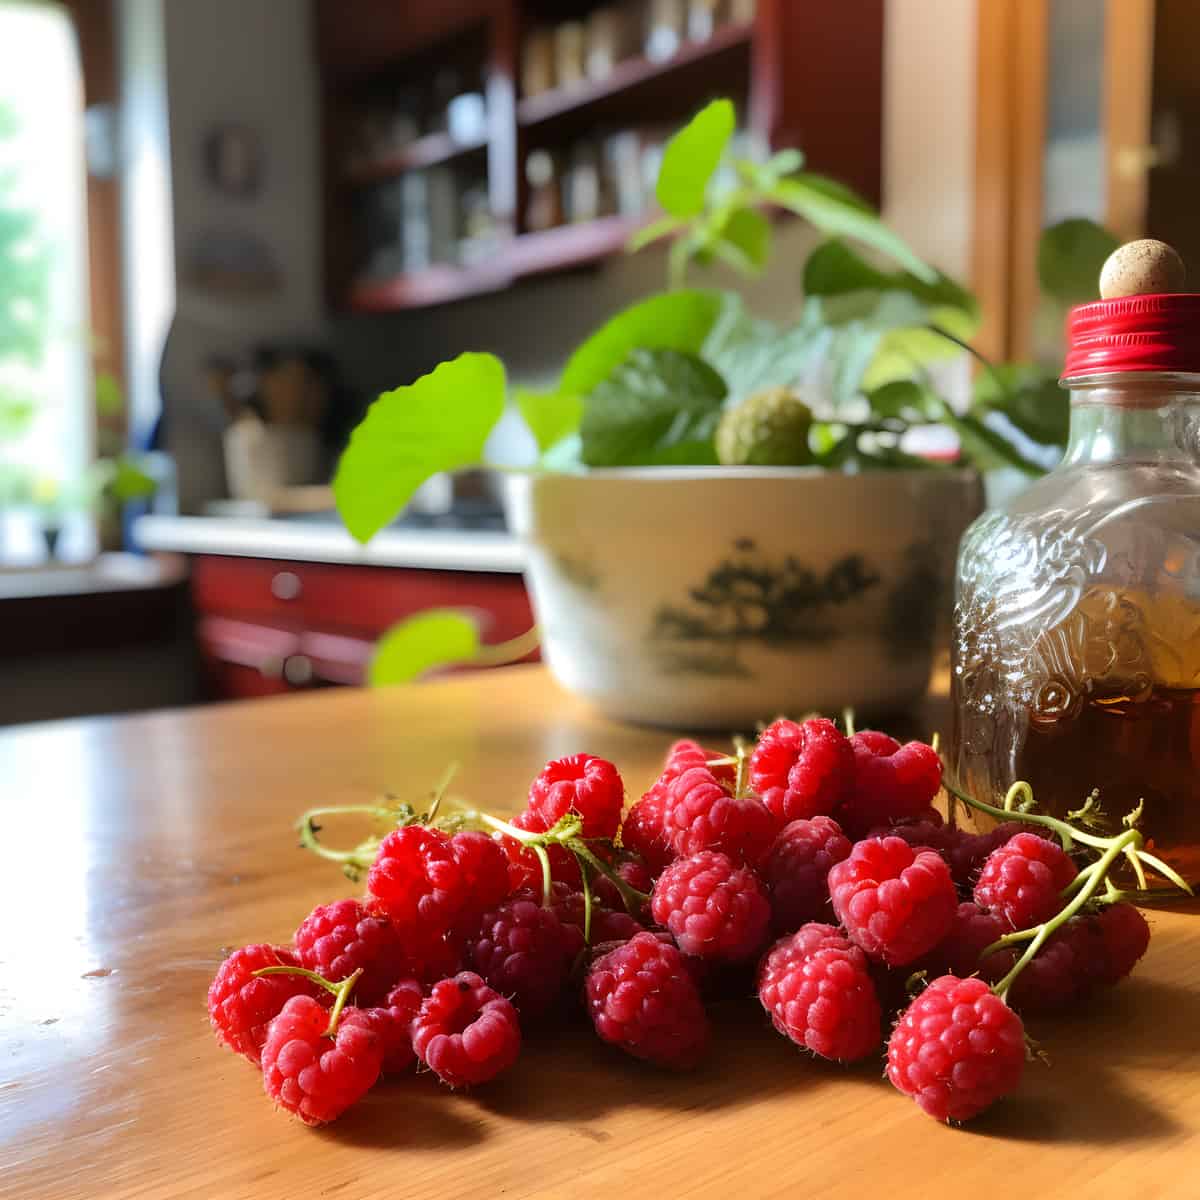 Wineberry on a kitchen counter